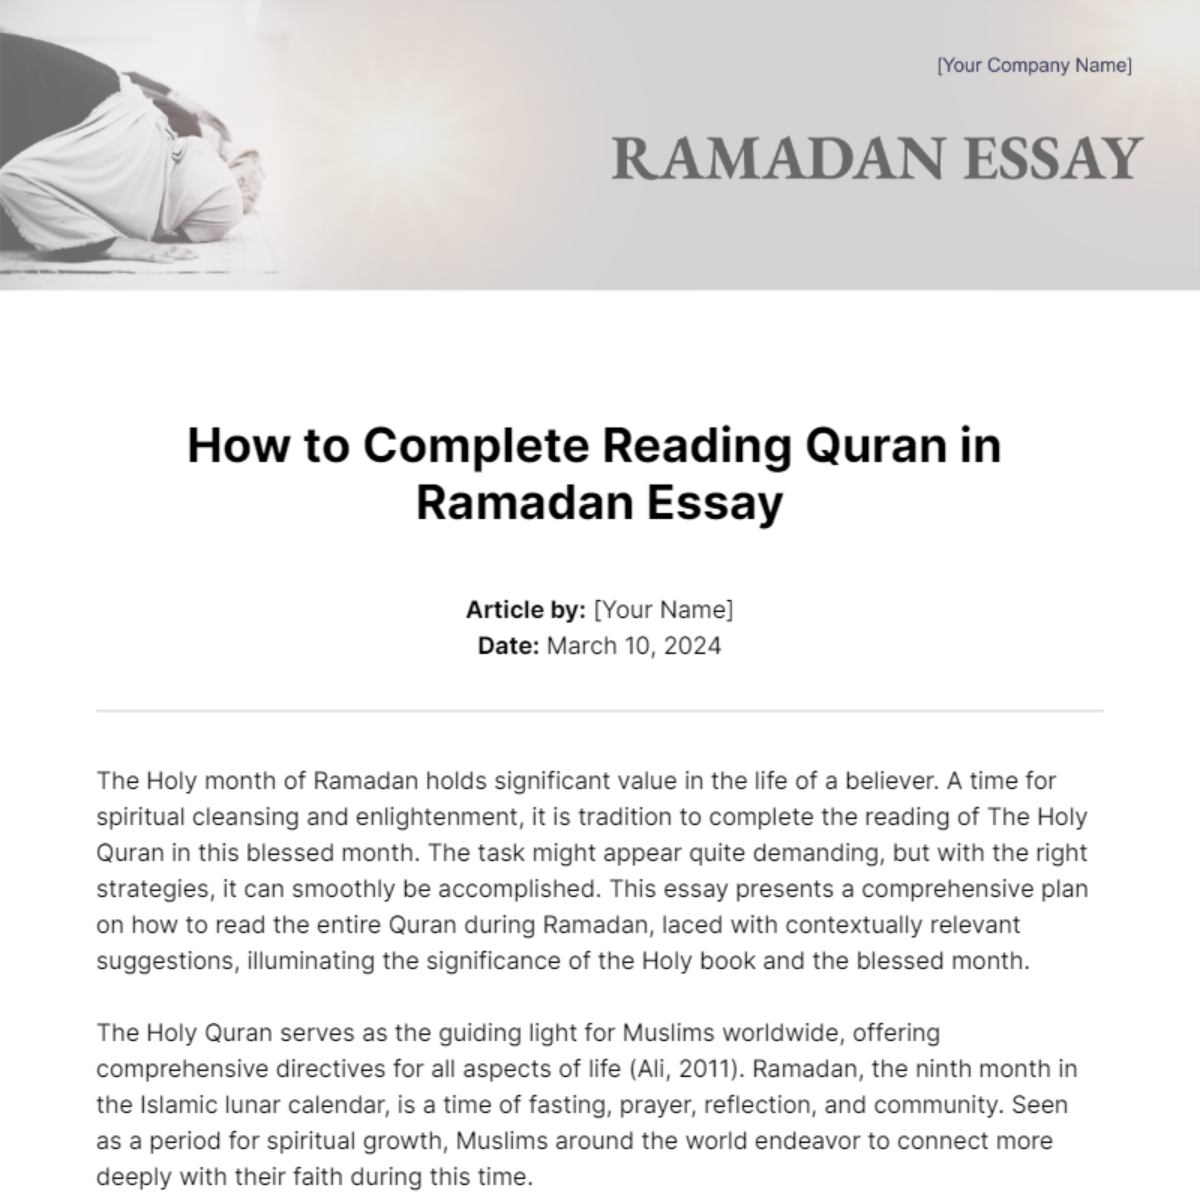 How to Complete Reading Quran in Ramadan Essay